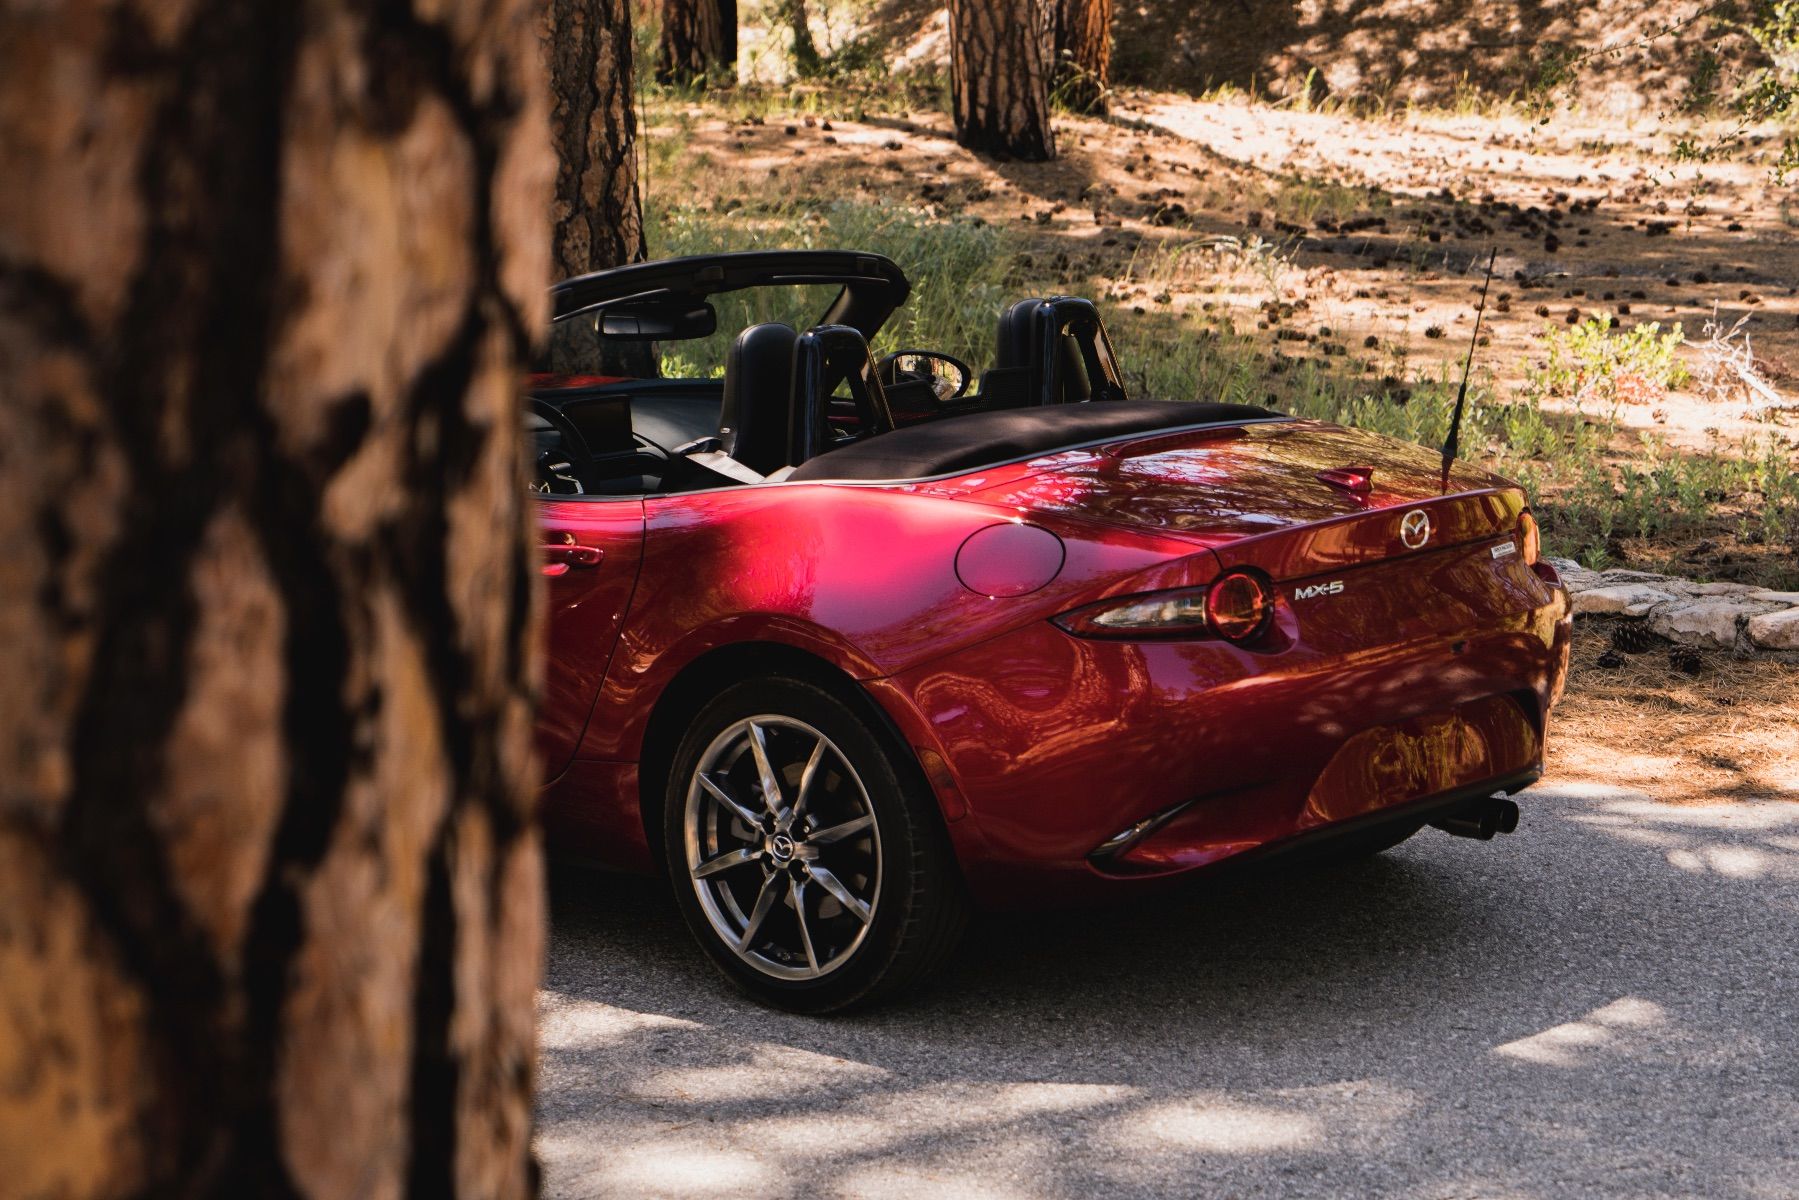 Consumer Reports Says The 2020 Mazda MX-5 Miata Is The Most Reliable Vehicle You Can Buy